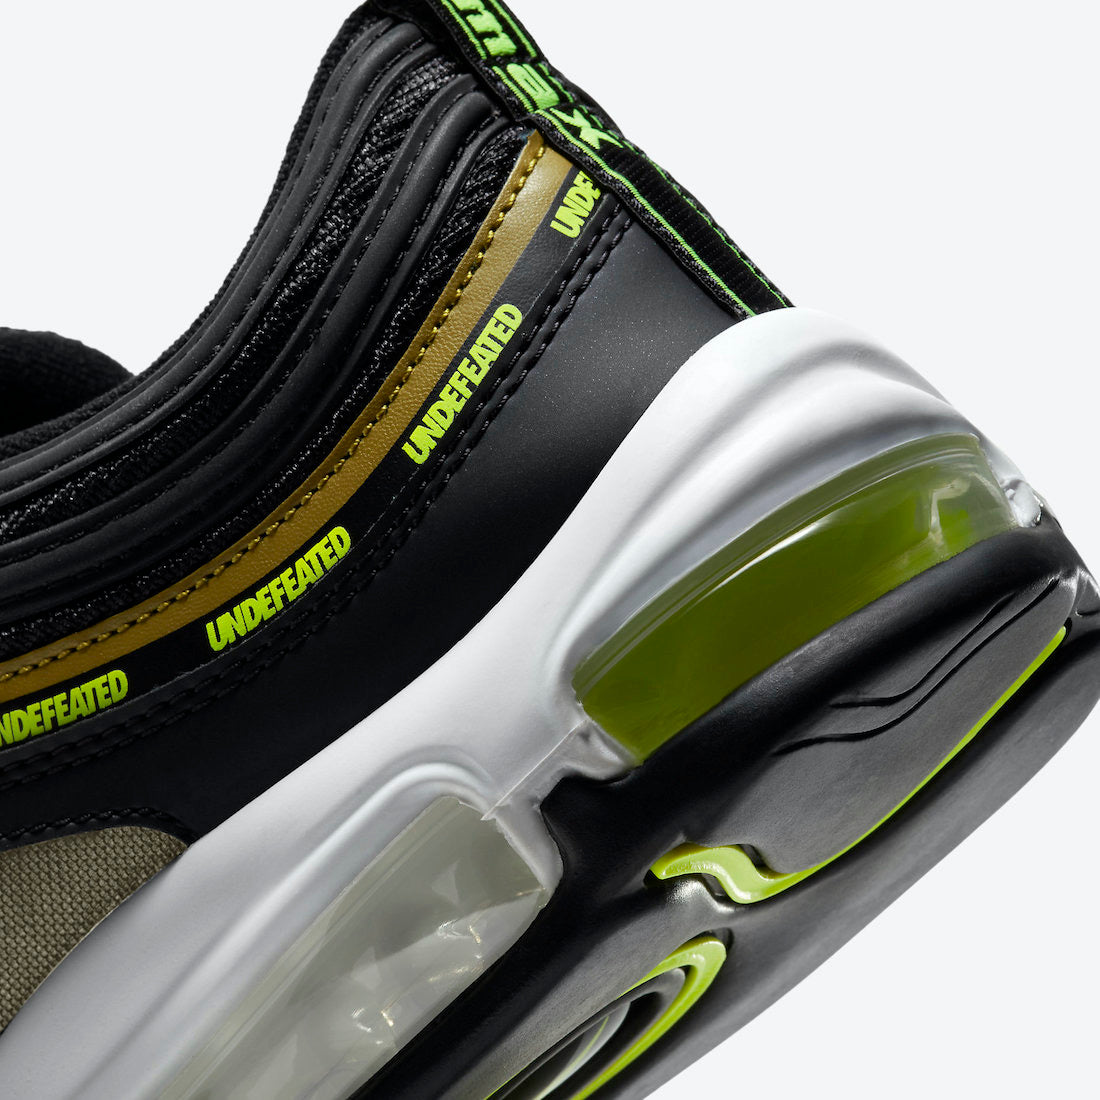 UNDEFEATED x Nike Air Max 97 “Black / Volt”